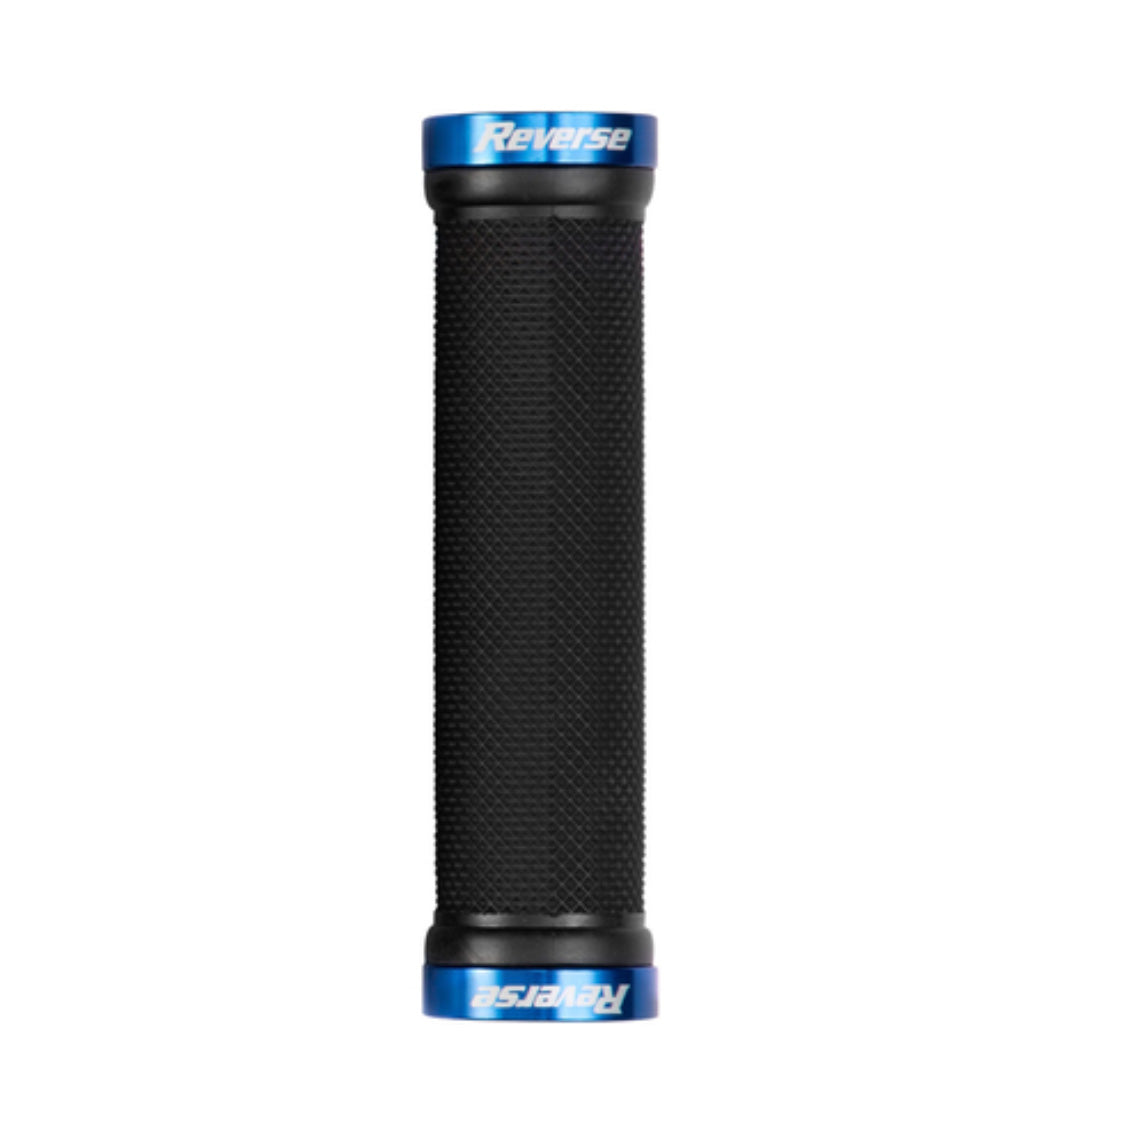 Reverse Classic Thick Lock-On Grips 31mm Black/Blue